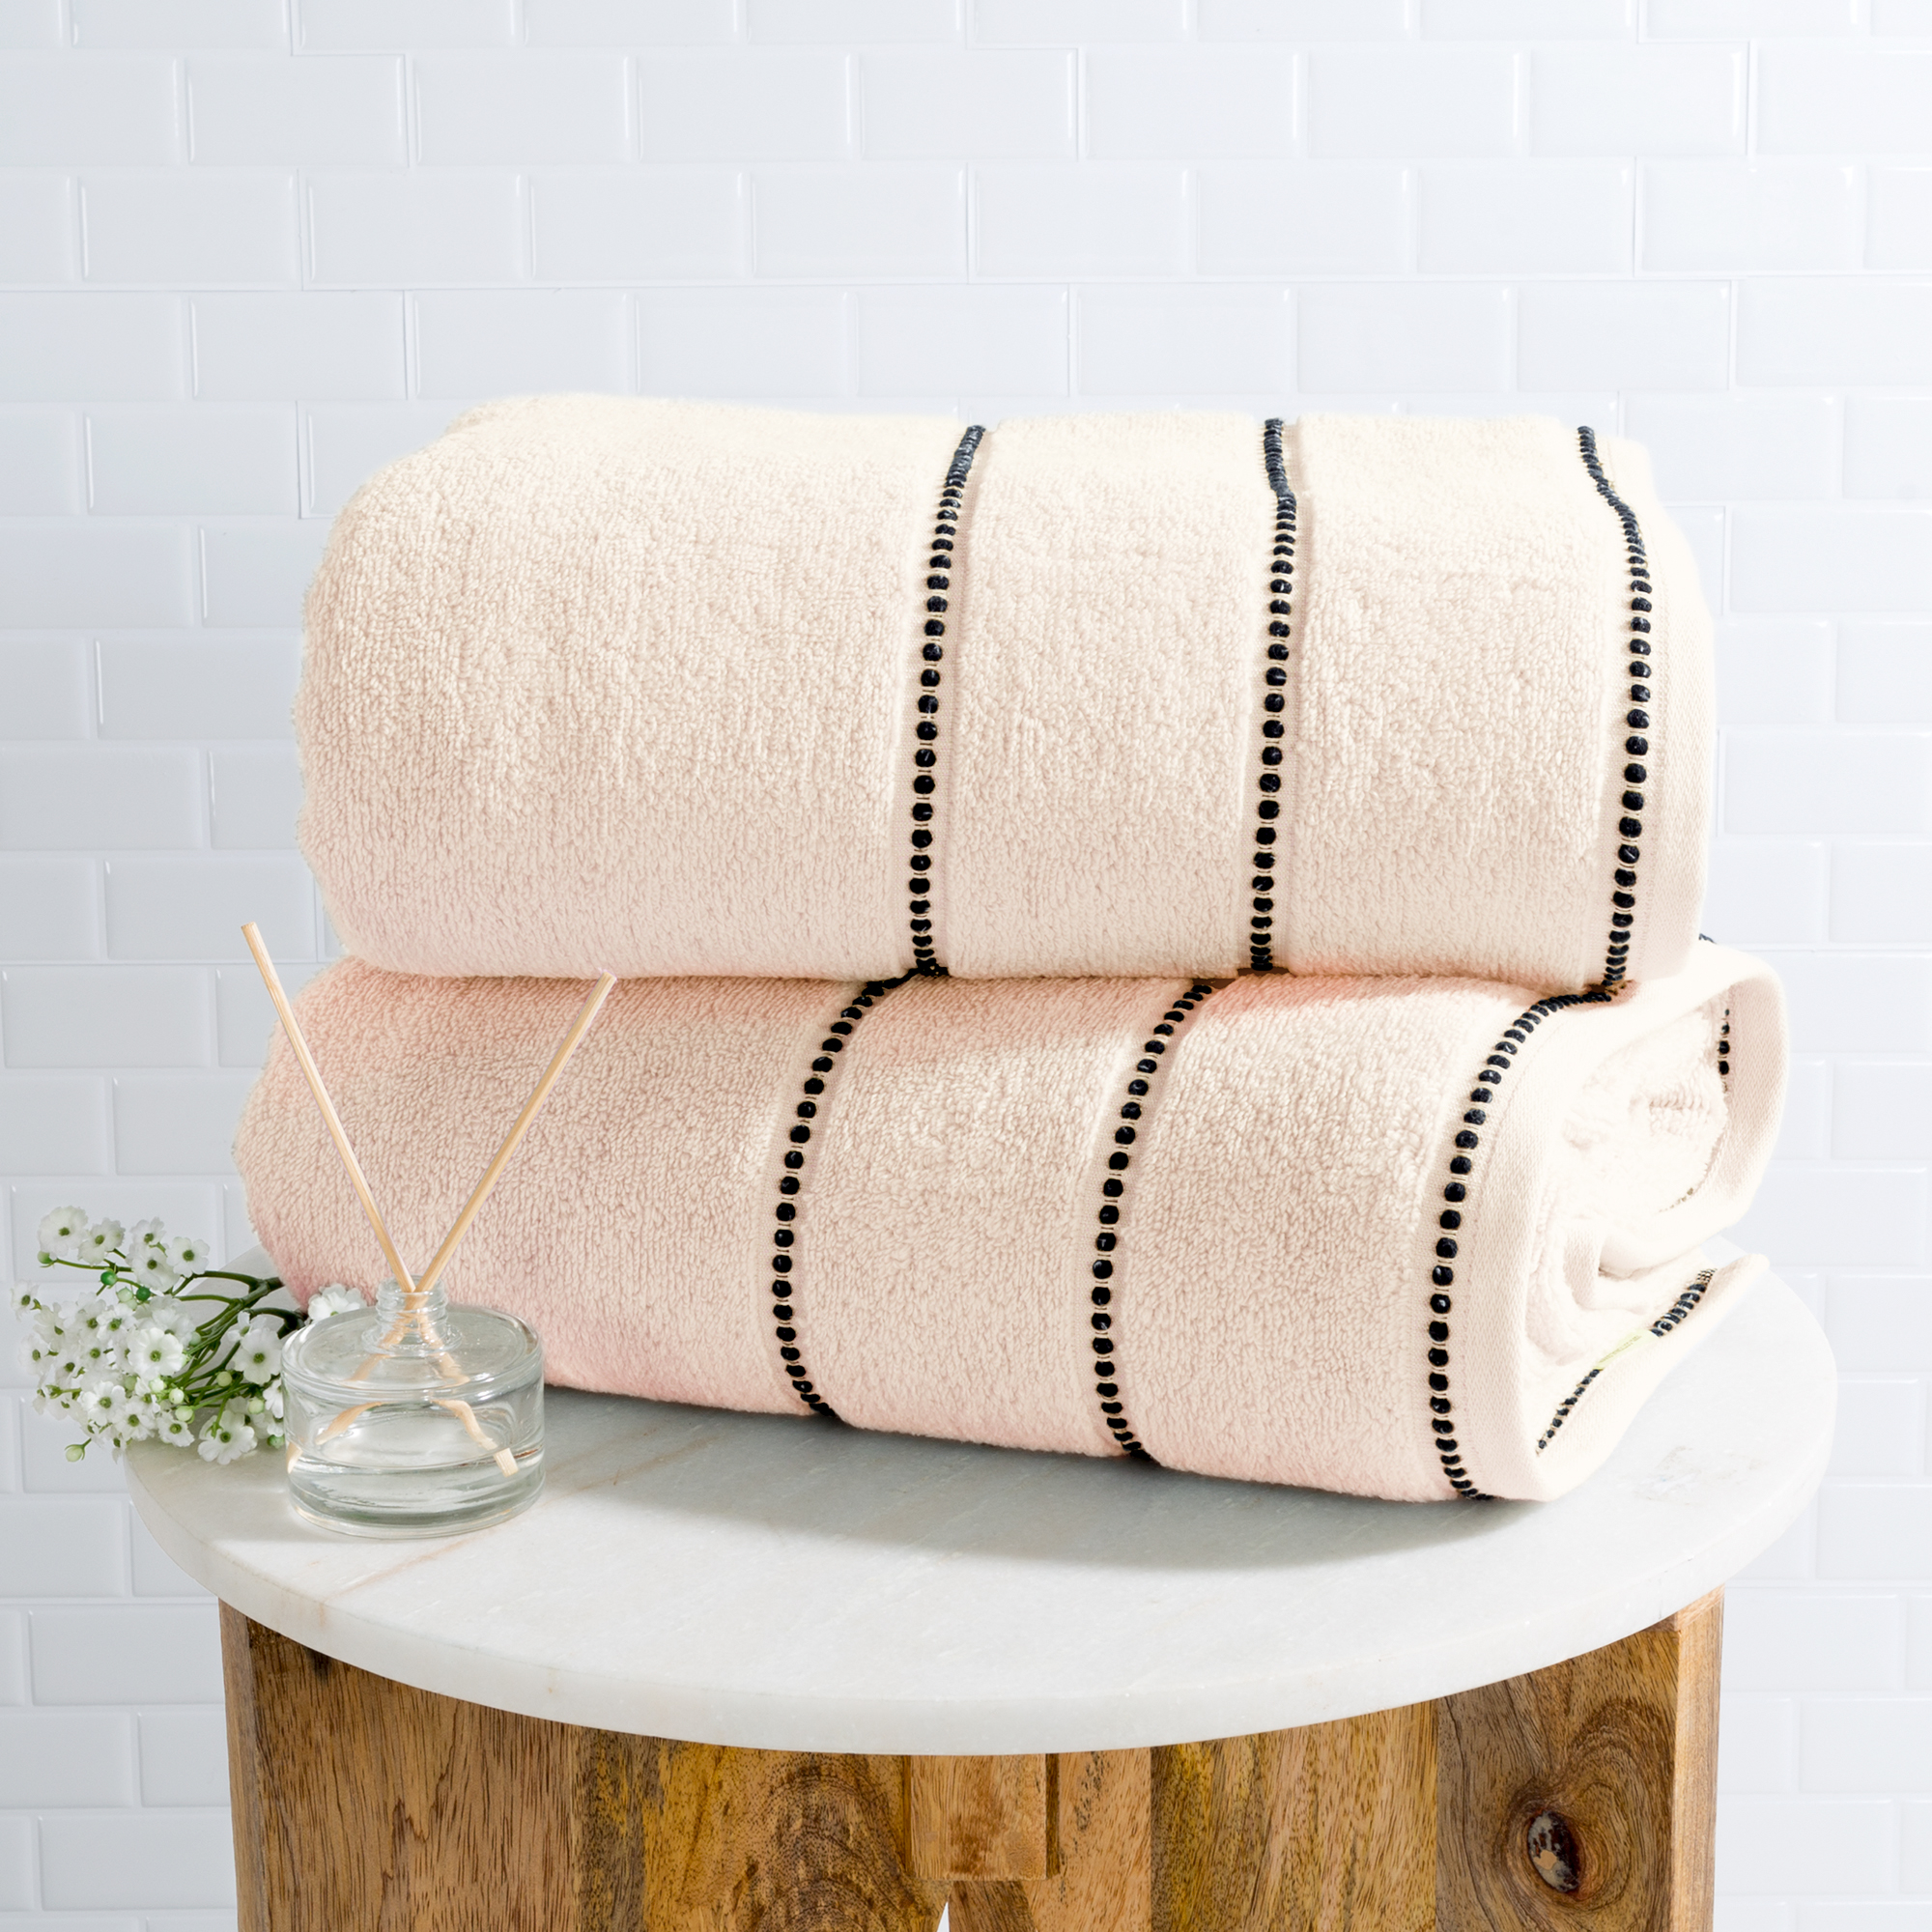 Luxurious Huge 34 X 68 In Cotton Towel Set- 2 Piece Bath Sheet Set Made From 100% Plush Cotton- Quick Dry, Soft And Absorbent Bone